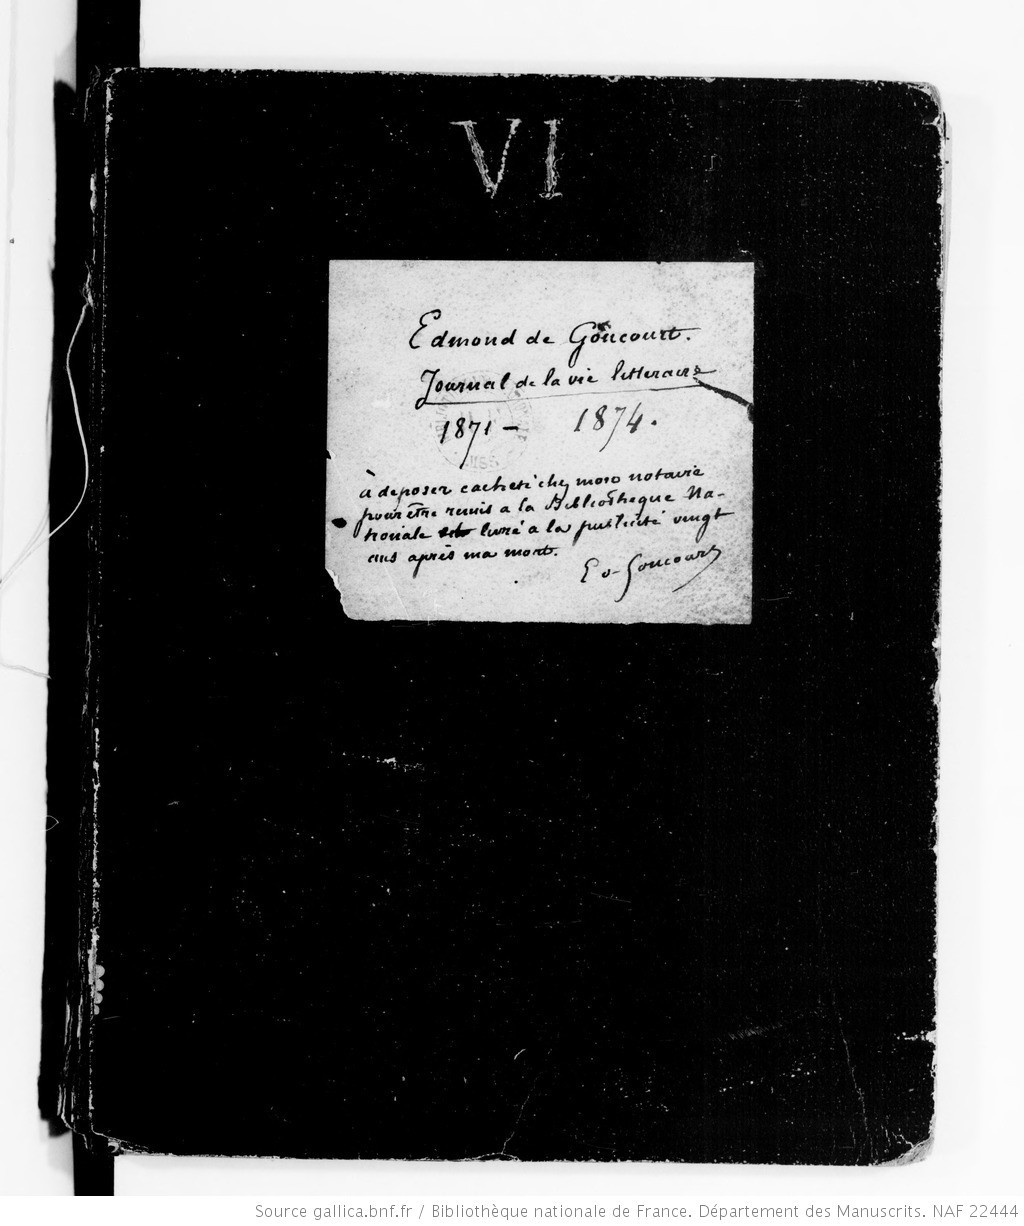 Front cover of the manuscript of the Goncourt's journal.